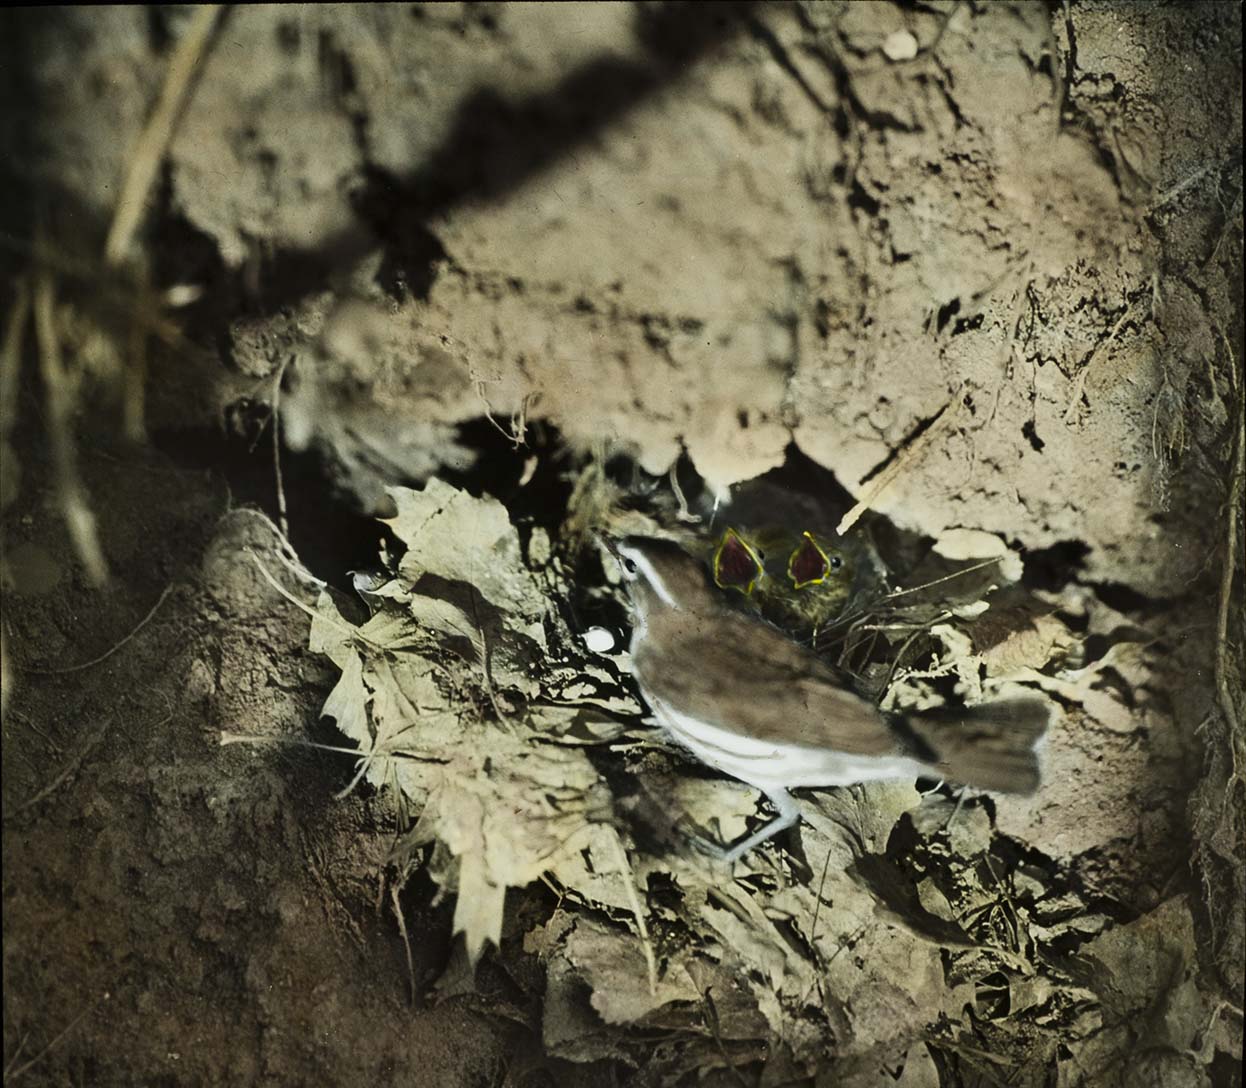 Lantern slide and photograph of a Louisiana Water Thrush at nest containing young